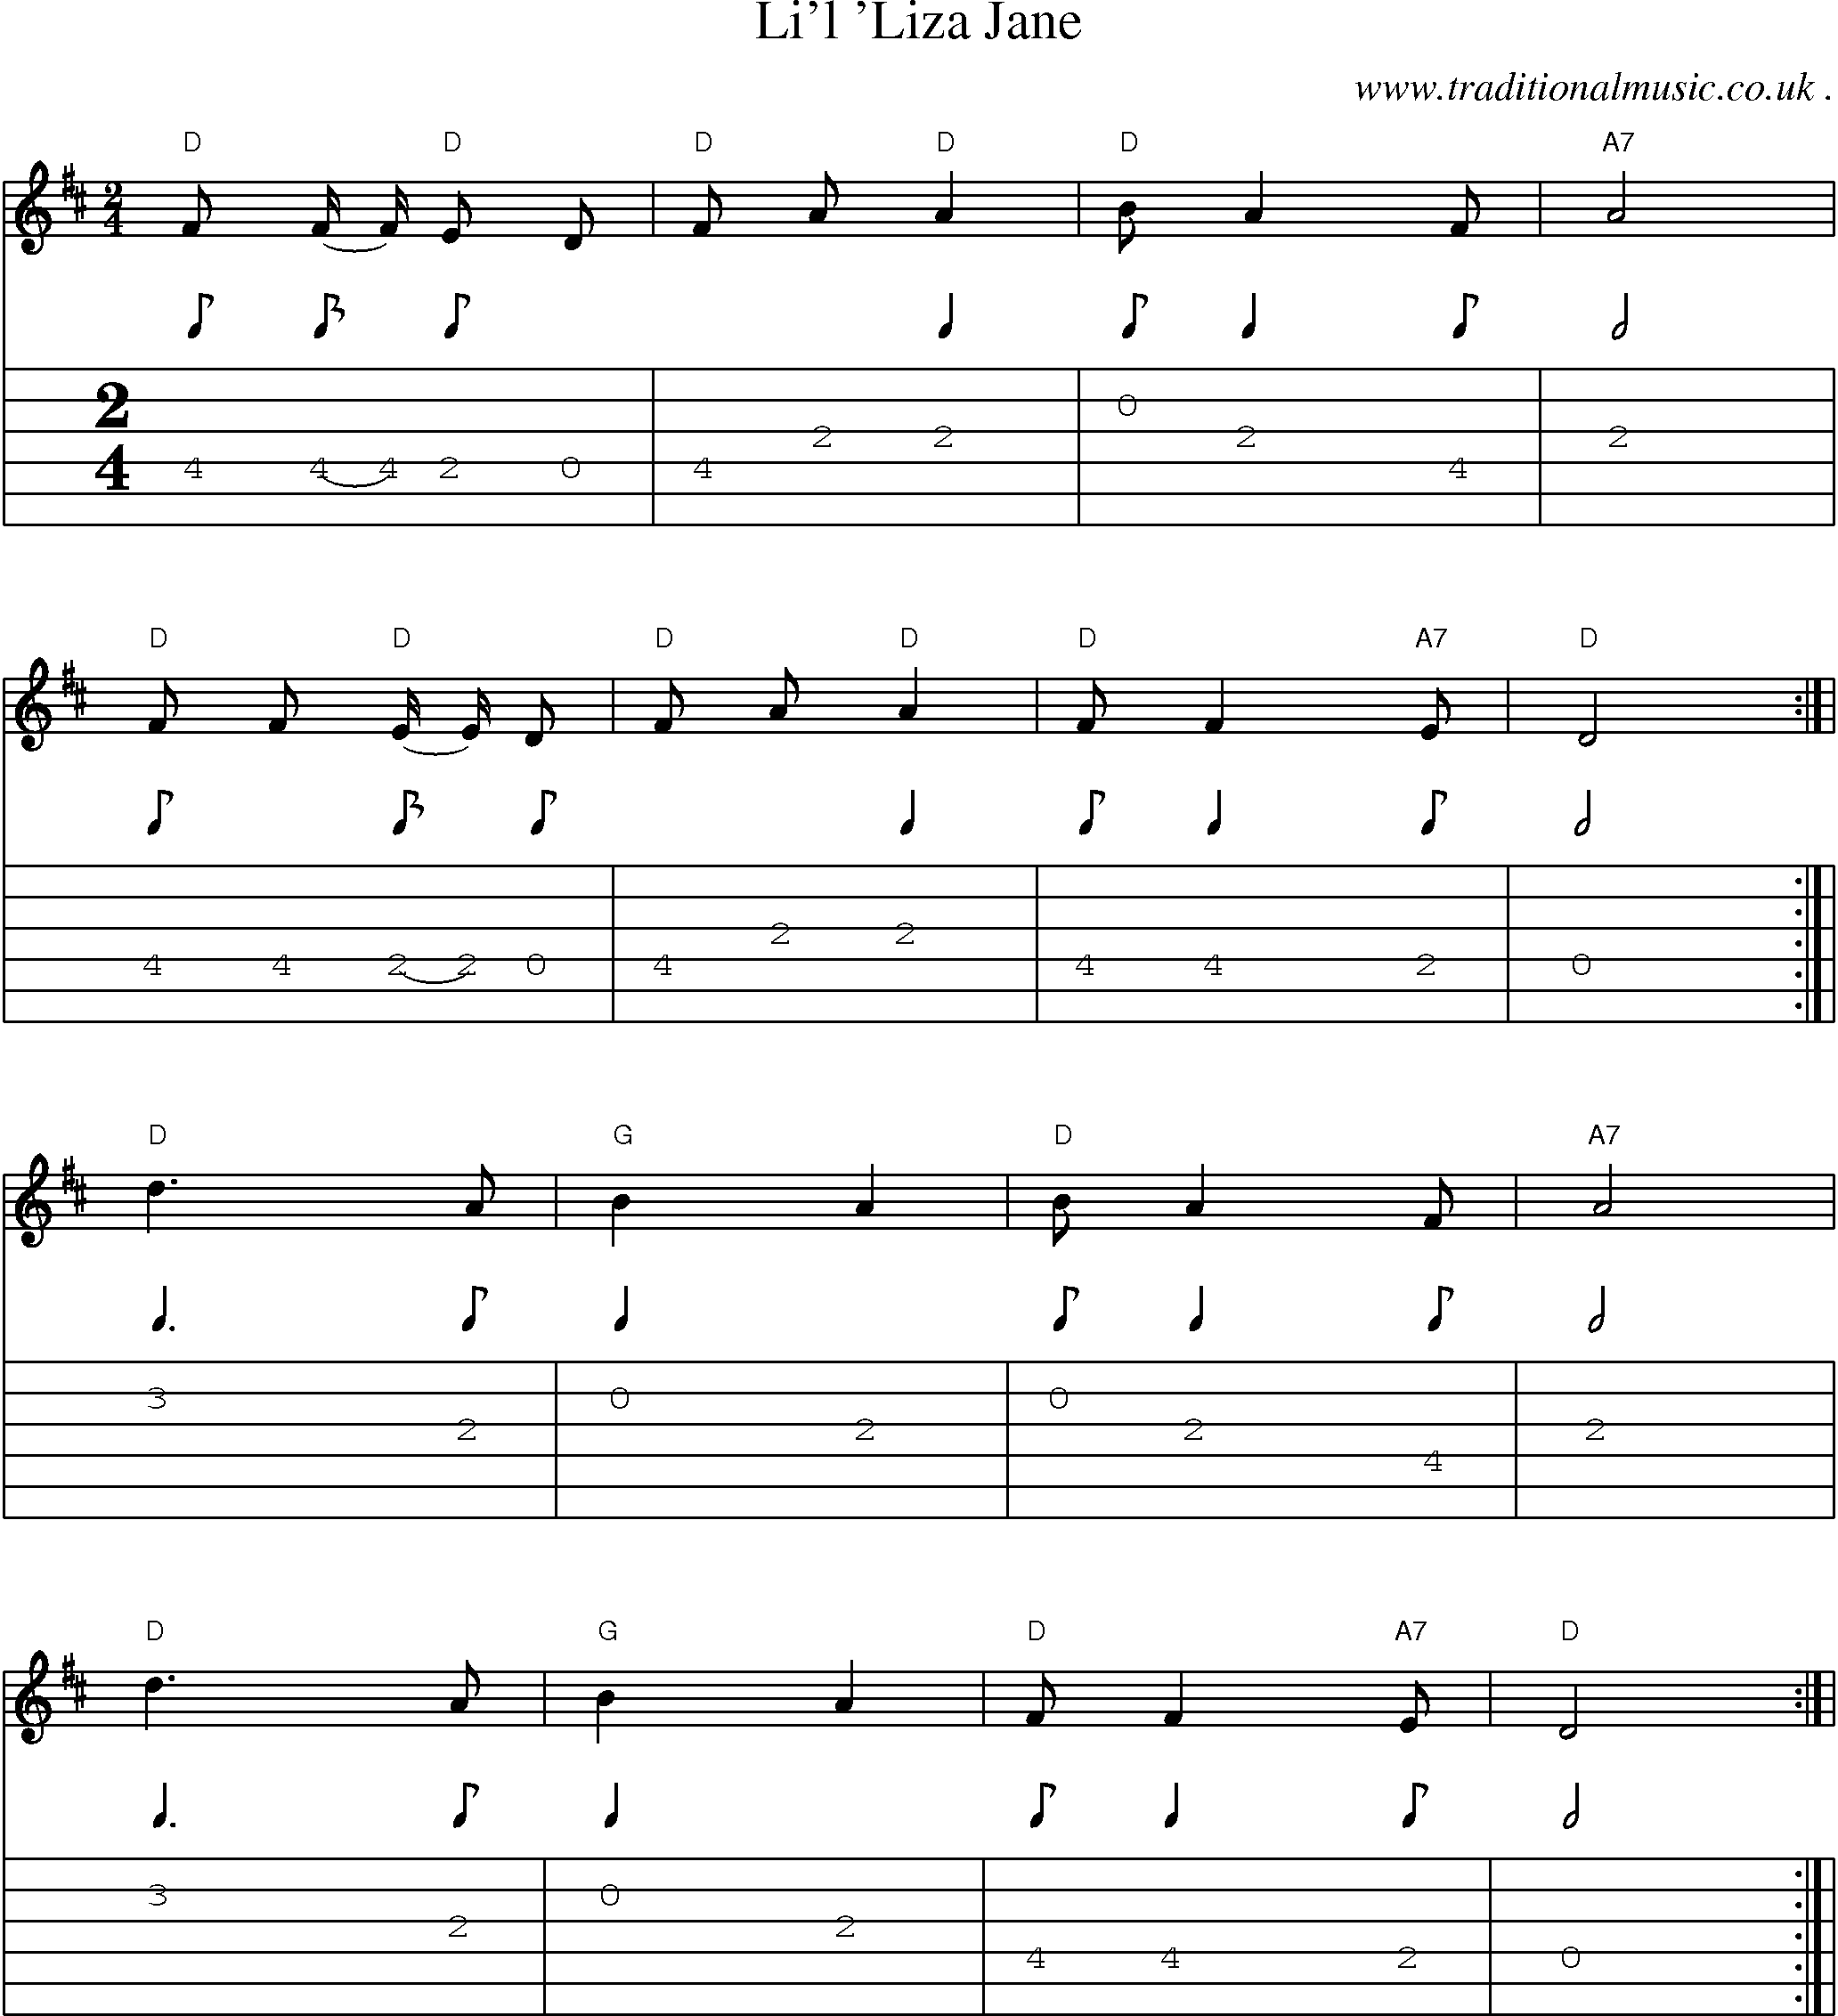 Music Score and Guitar Tabs for Lil liza Jane